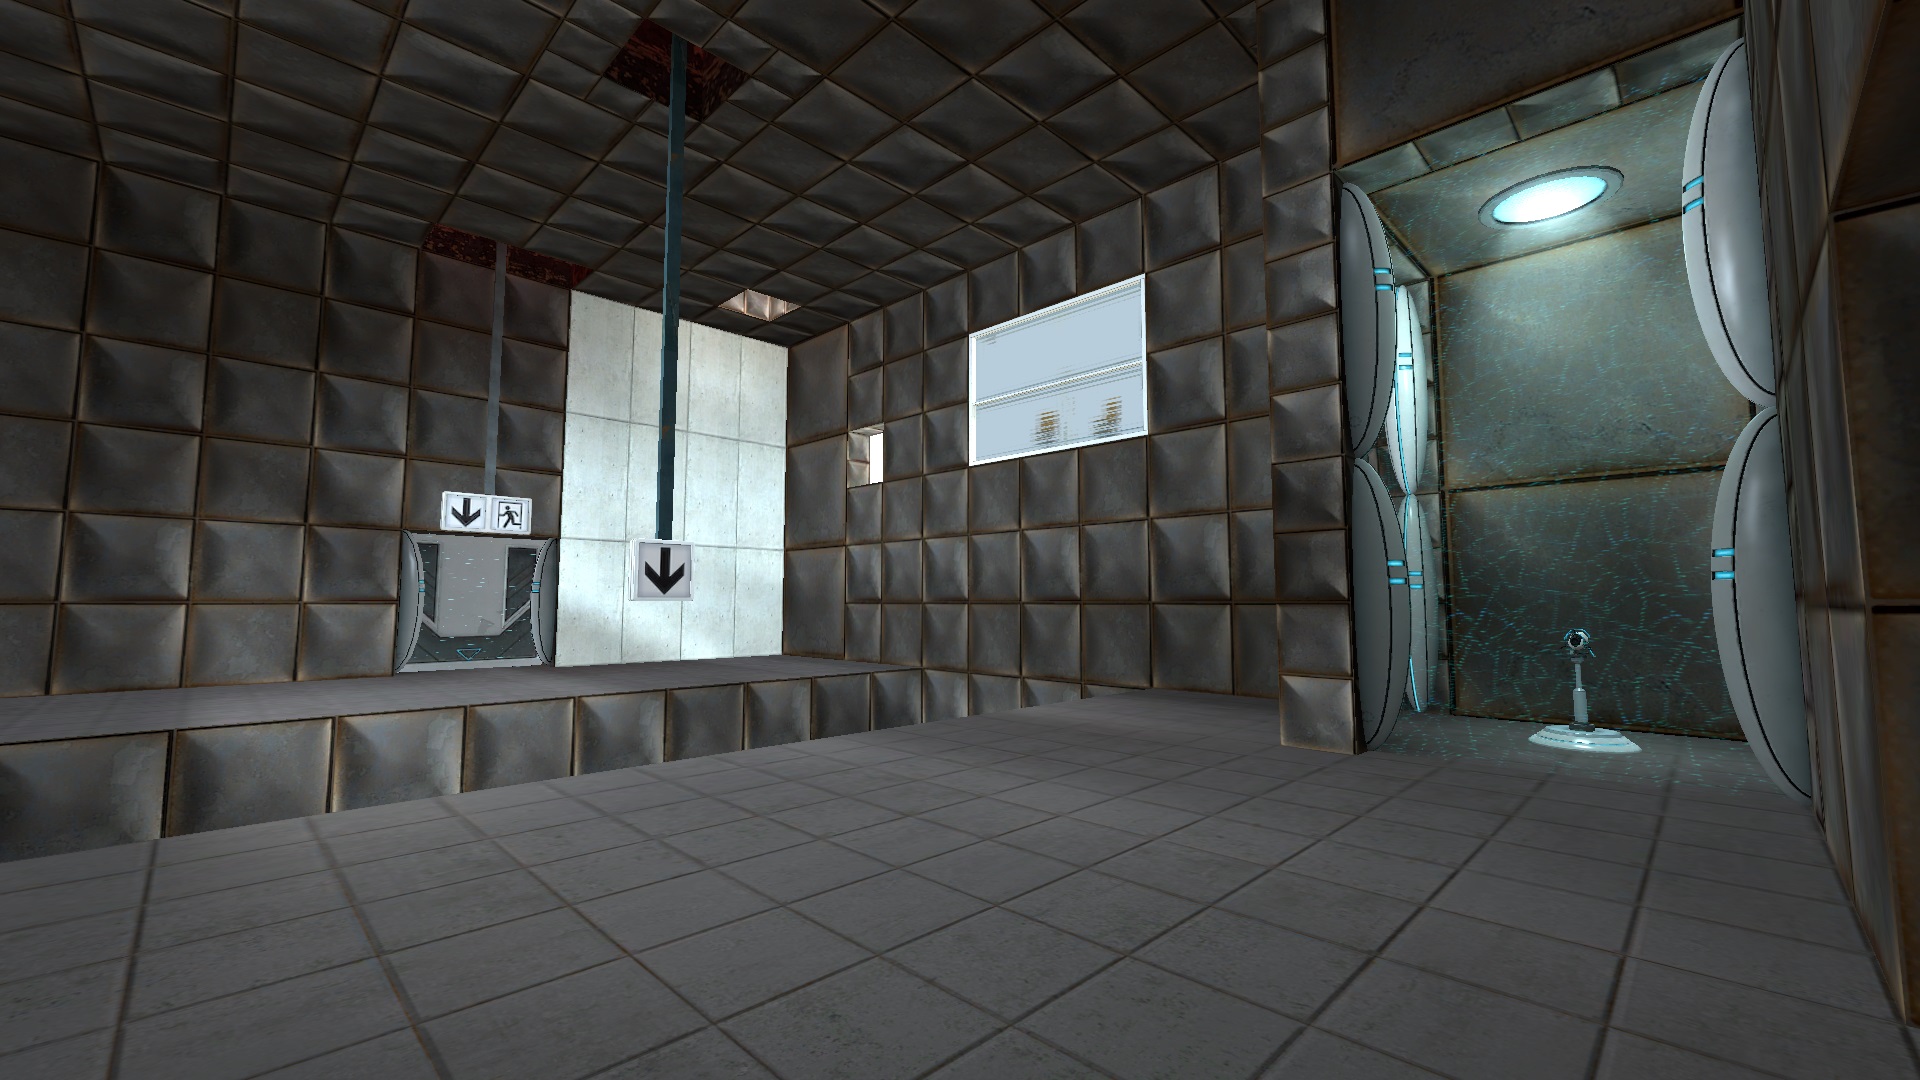 The first tutorial room has arrows pointing to the exit and spike pit, and a spotlight on a portal device behind hard light walls.